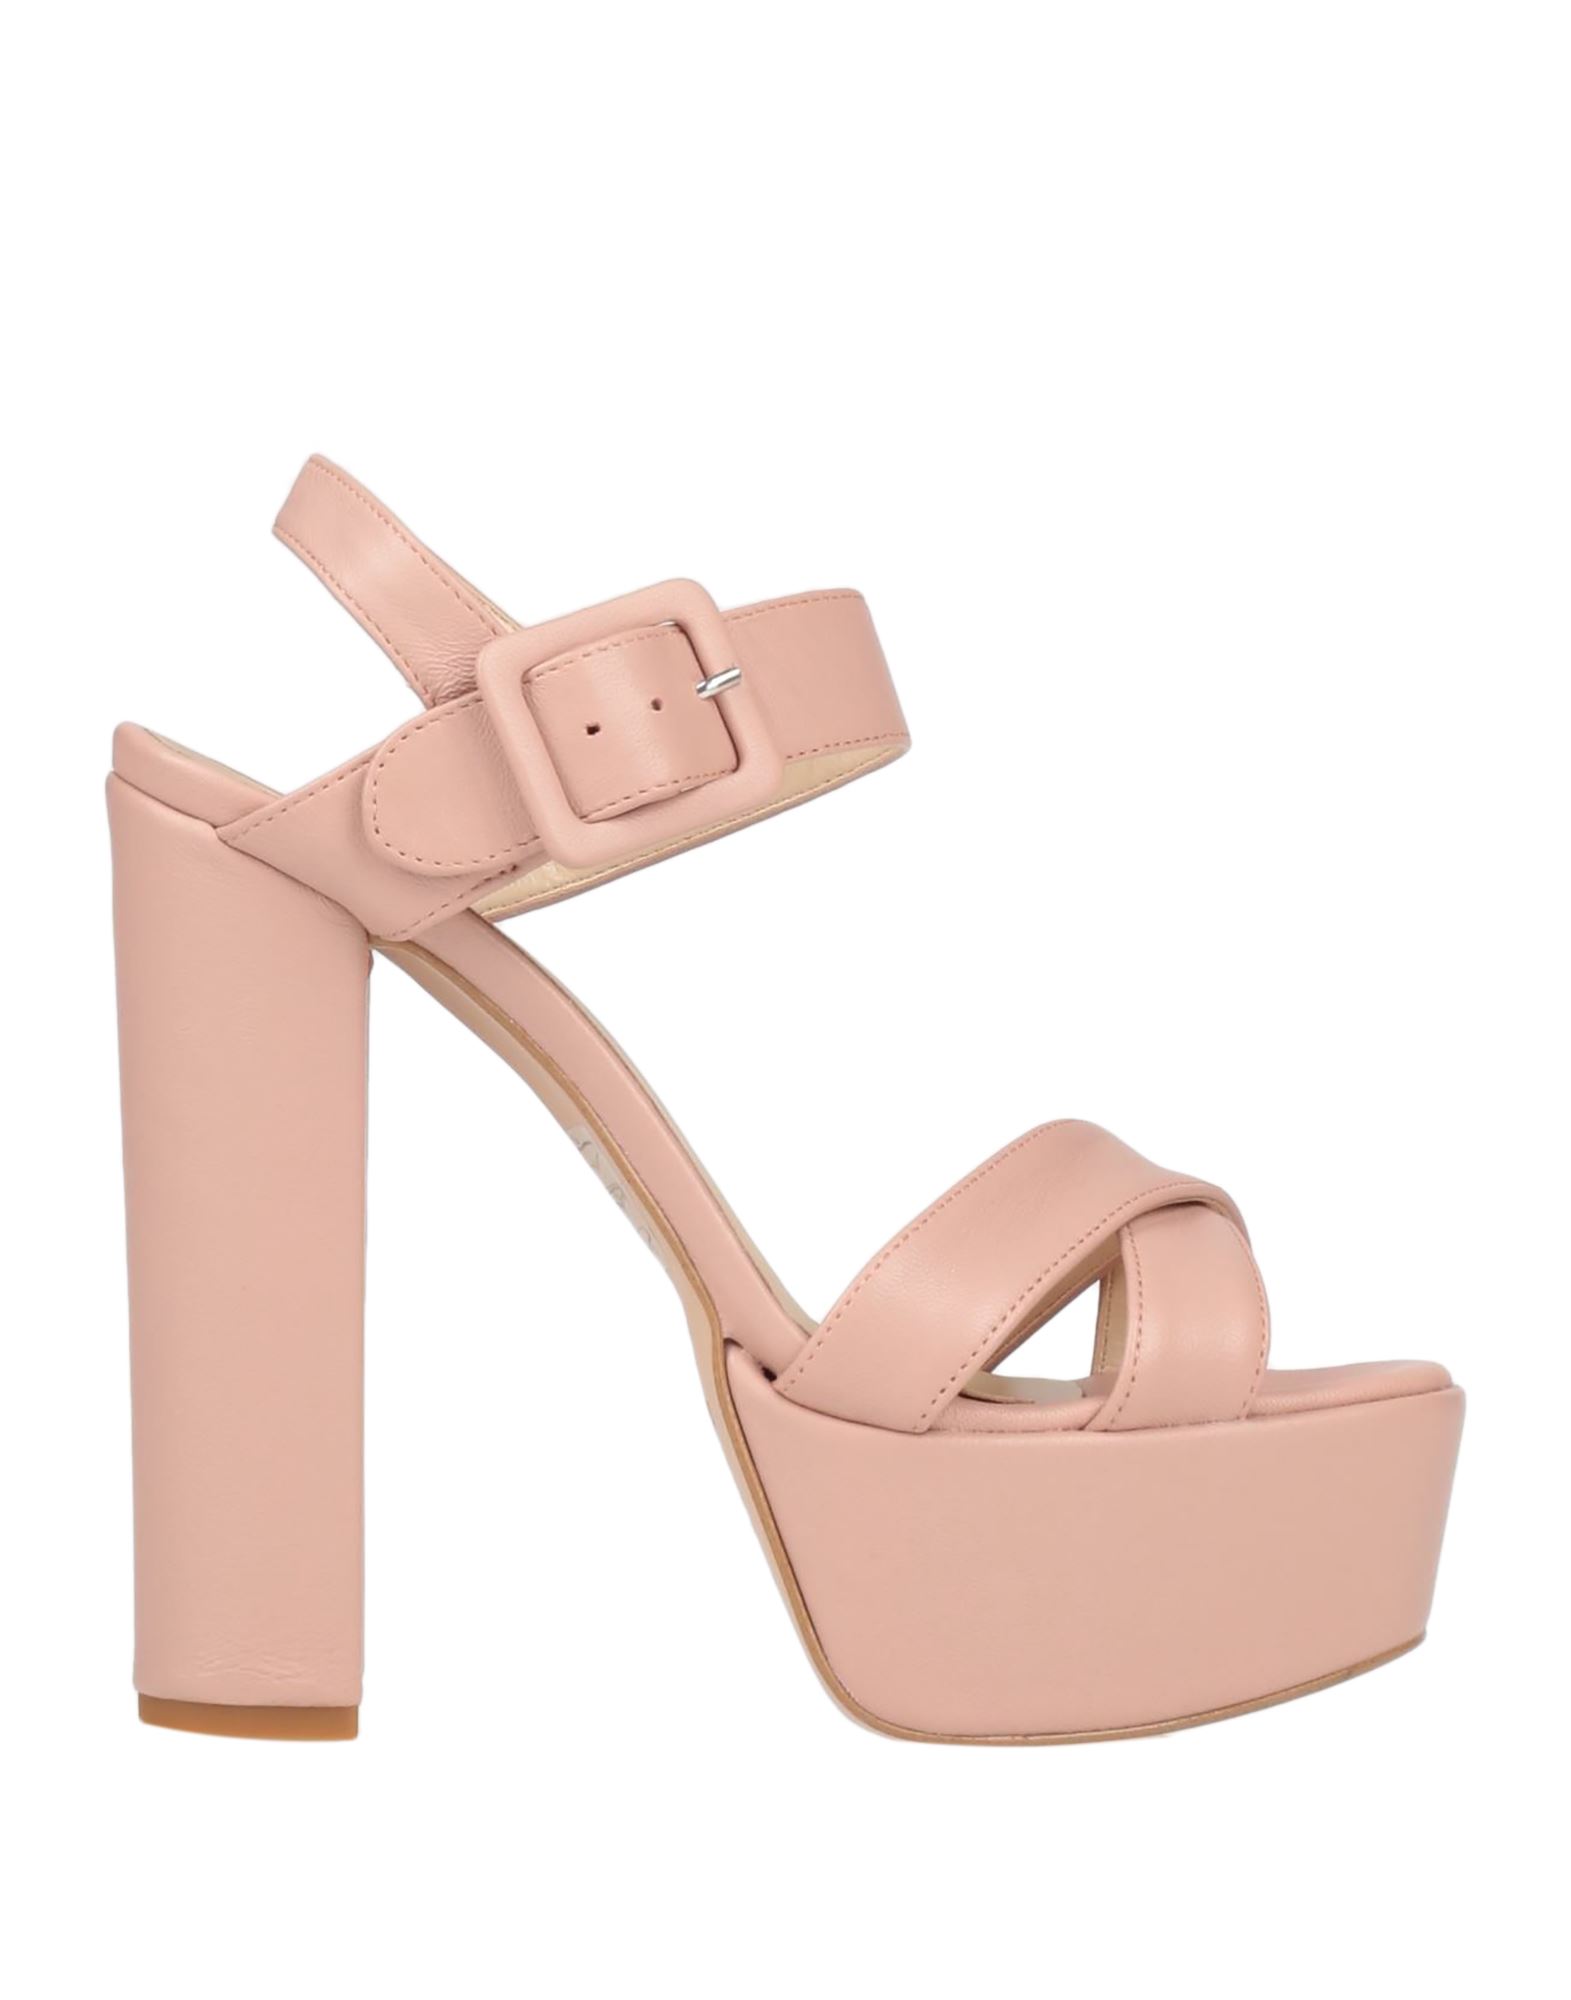 Shop Islo Isabella Lorusso Woman Sandals Light Pink Size 8 Soft Leather